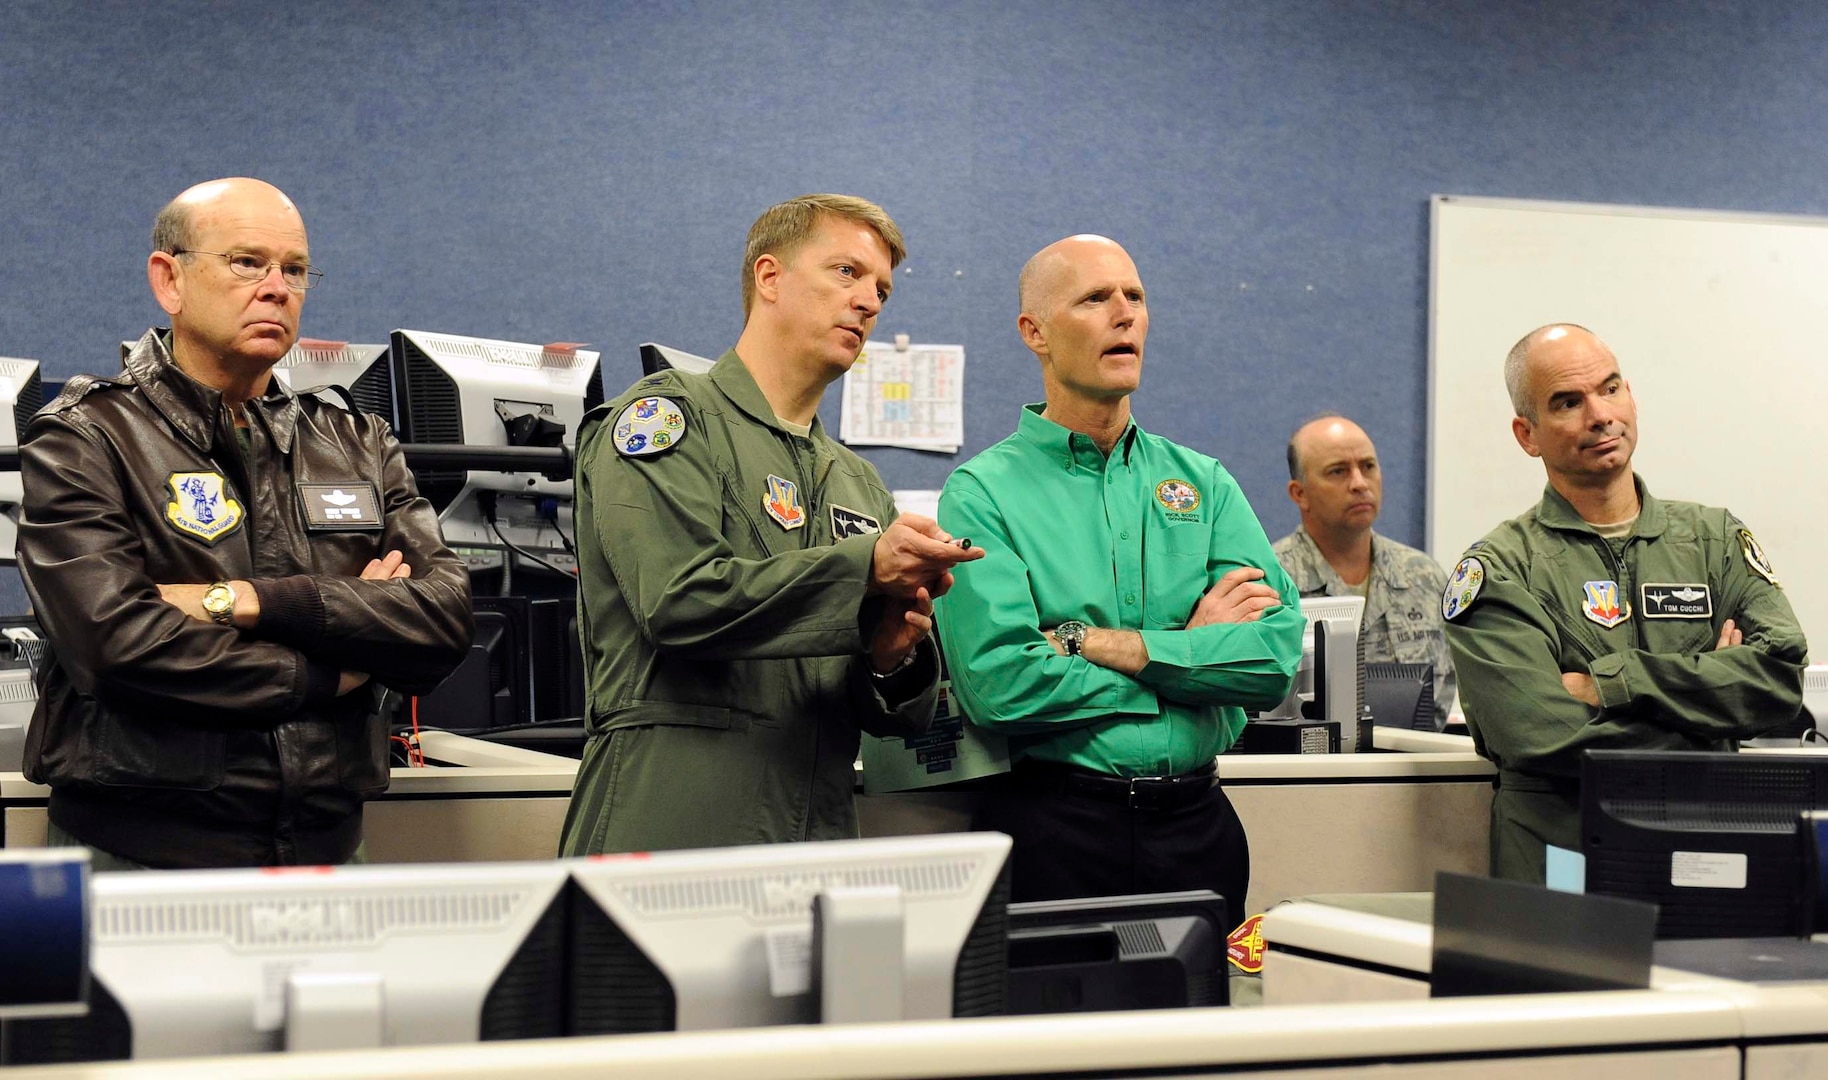 TYNDALL AIR FORCE BASE, Fla. - Col. Randy Spear (second from left), 601st Air and Space Operations Center commander, points out a simulated "track of interest" on a radar screen during an exercise to Florida Gov. Rick Scott at Tyndall Air Force Base, Fla., Jan. 5. Scott came to Tyndall to visit with Florida Air National Guardsmen from the 101st Air and Space Operations Group, which provides the manning for the 601st AOC, and to see firsthand the capabilities and assets Tyndall has to offer. 

(U.S. Air Force photo by Lisa Norman) 

